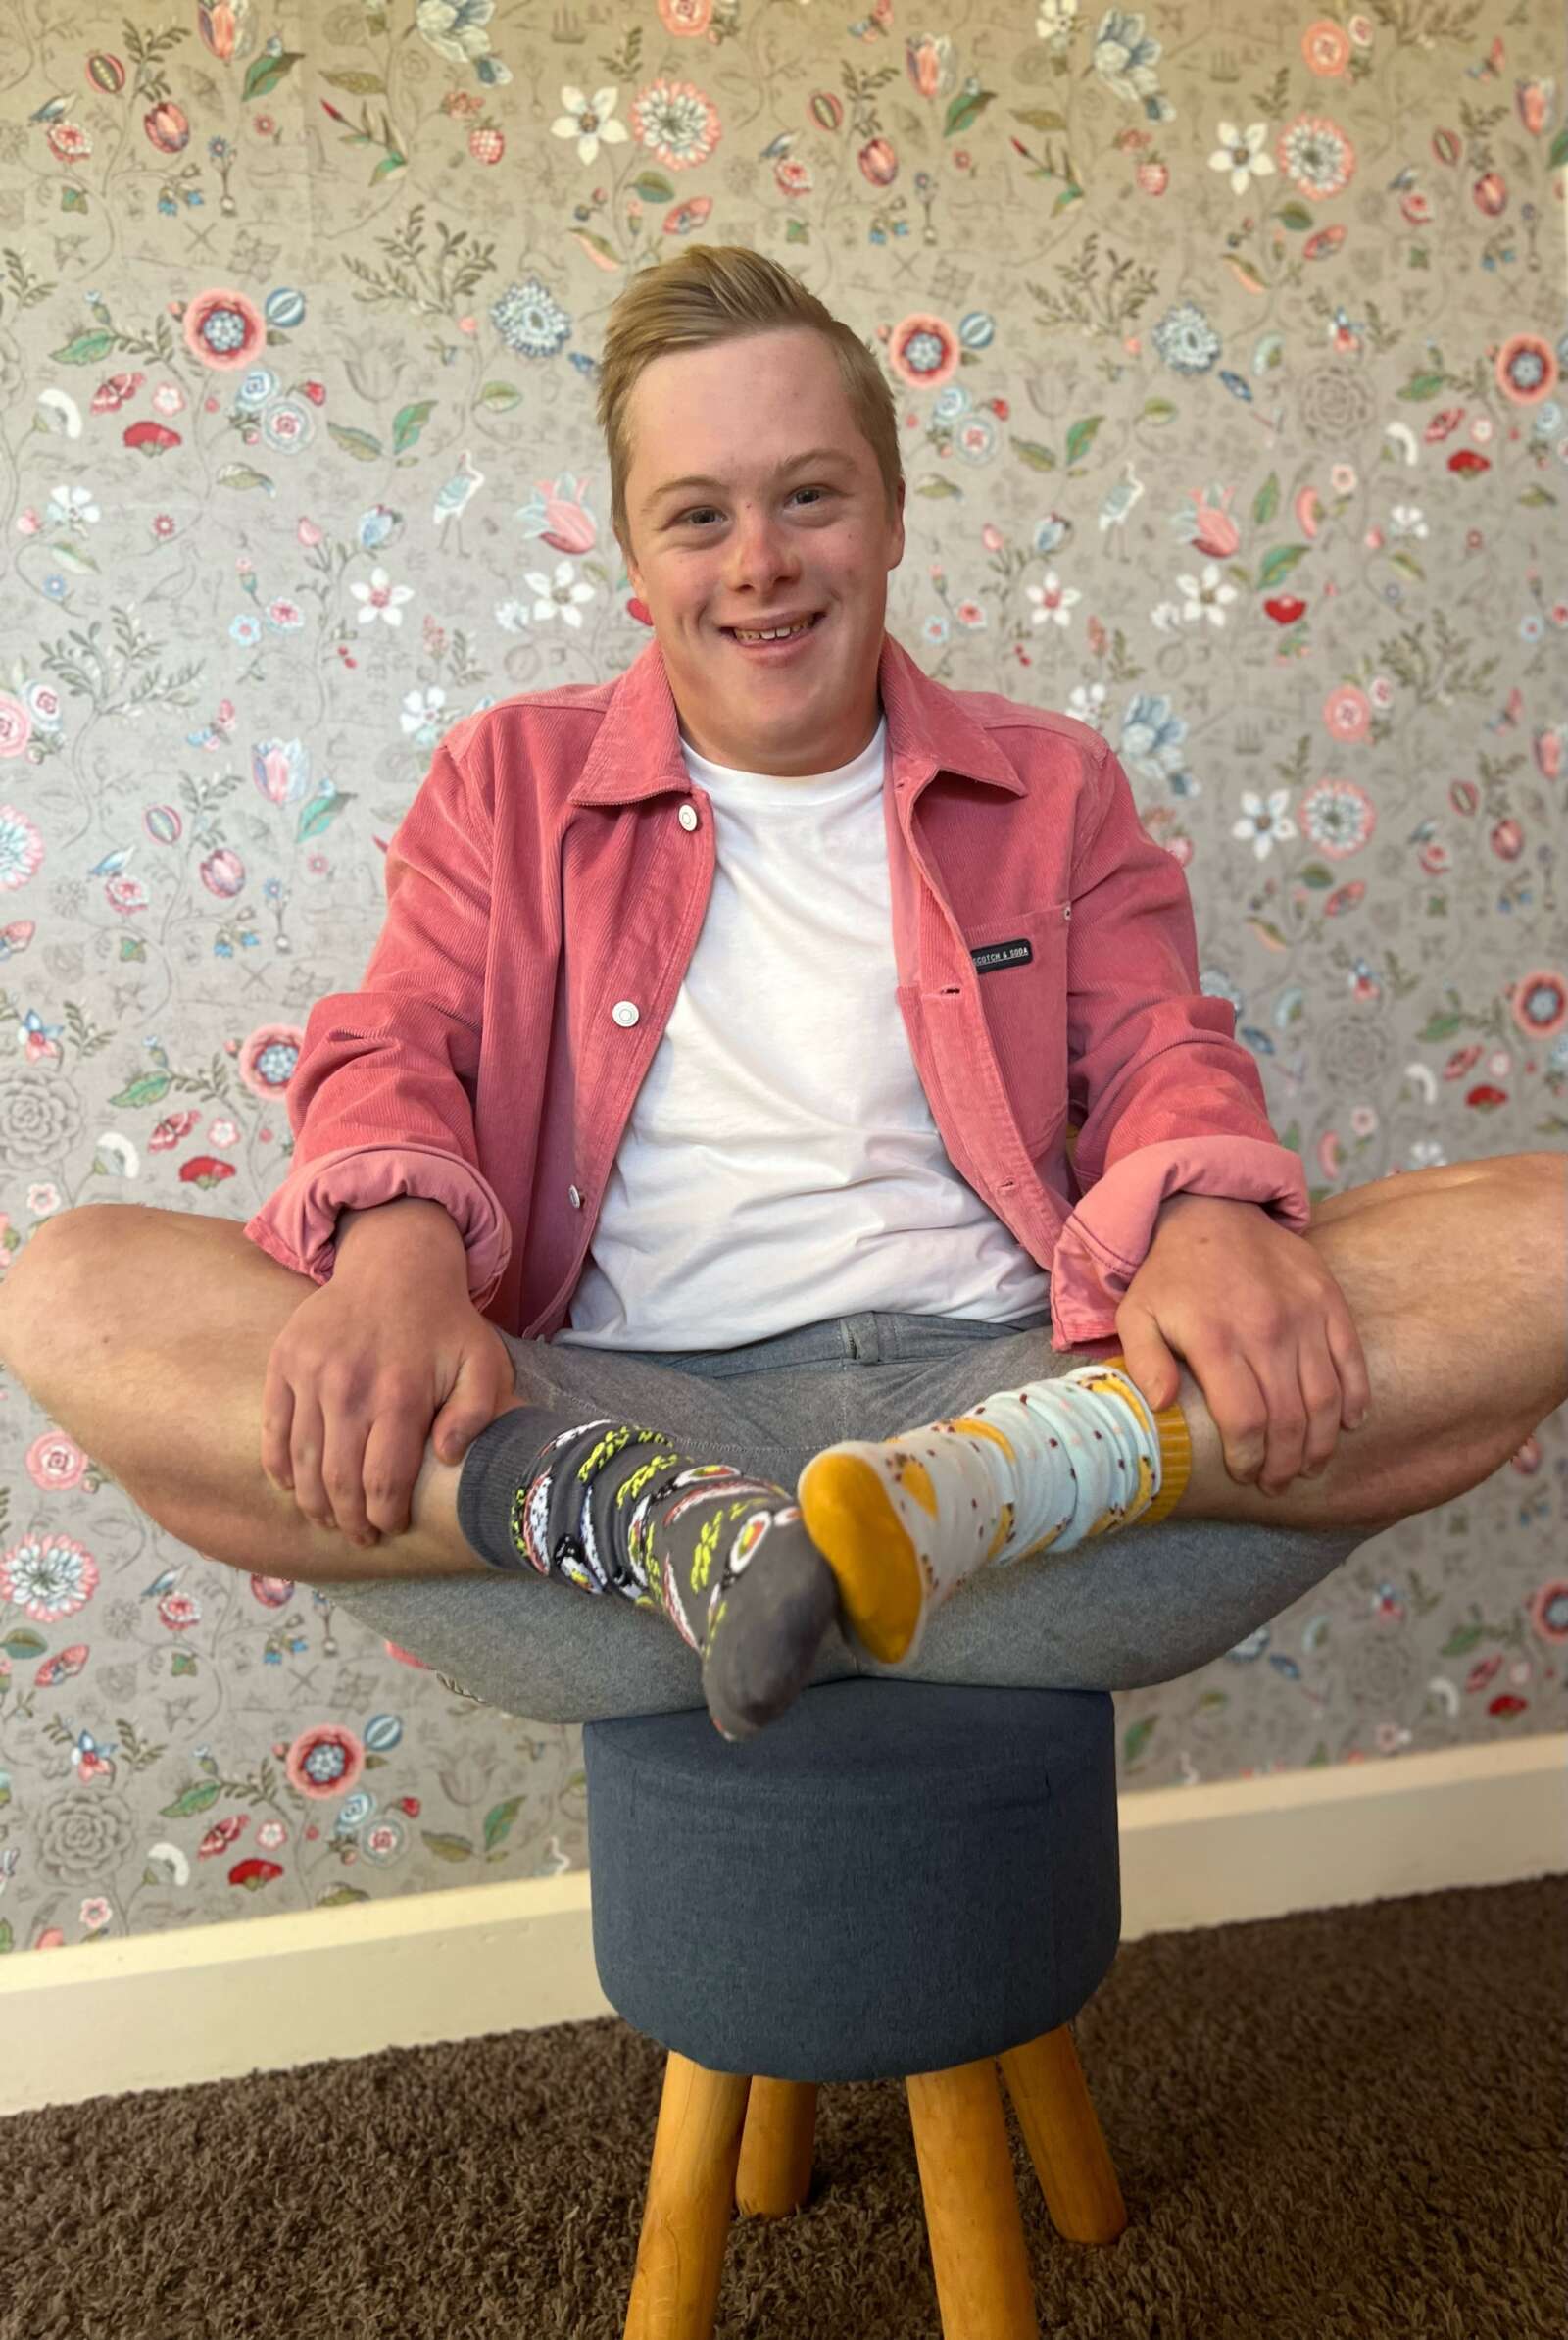 Luka sits on a stool in a red shirt, white tee and grey shorts. He is holding his feet up showing off his odd socks in recognition of World Down syndrome Day.